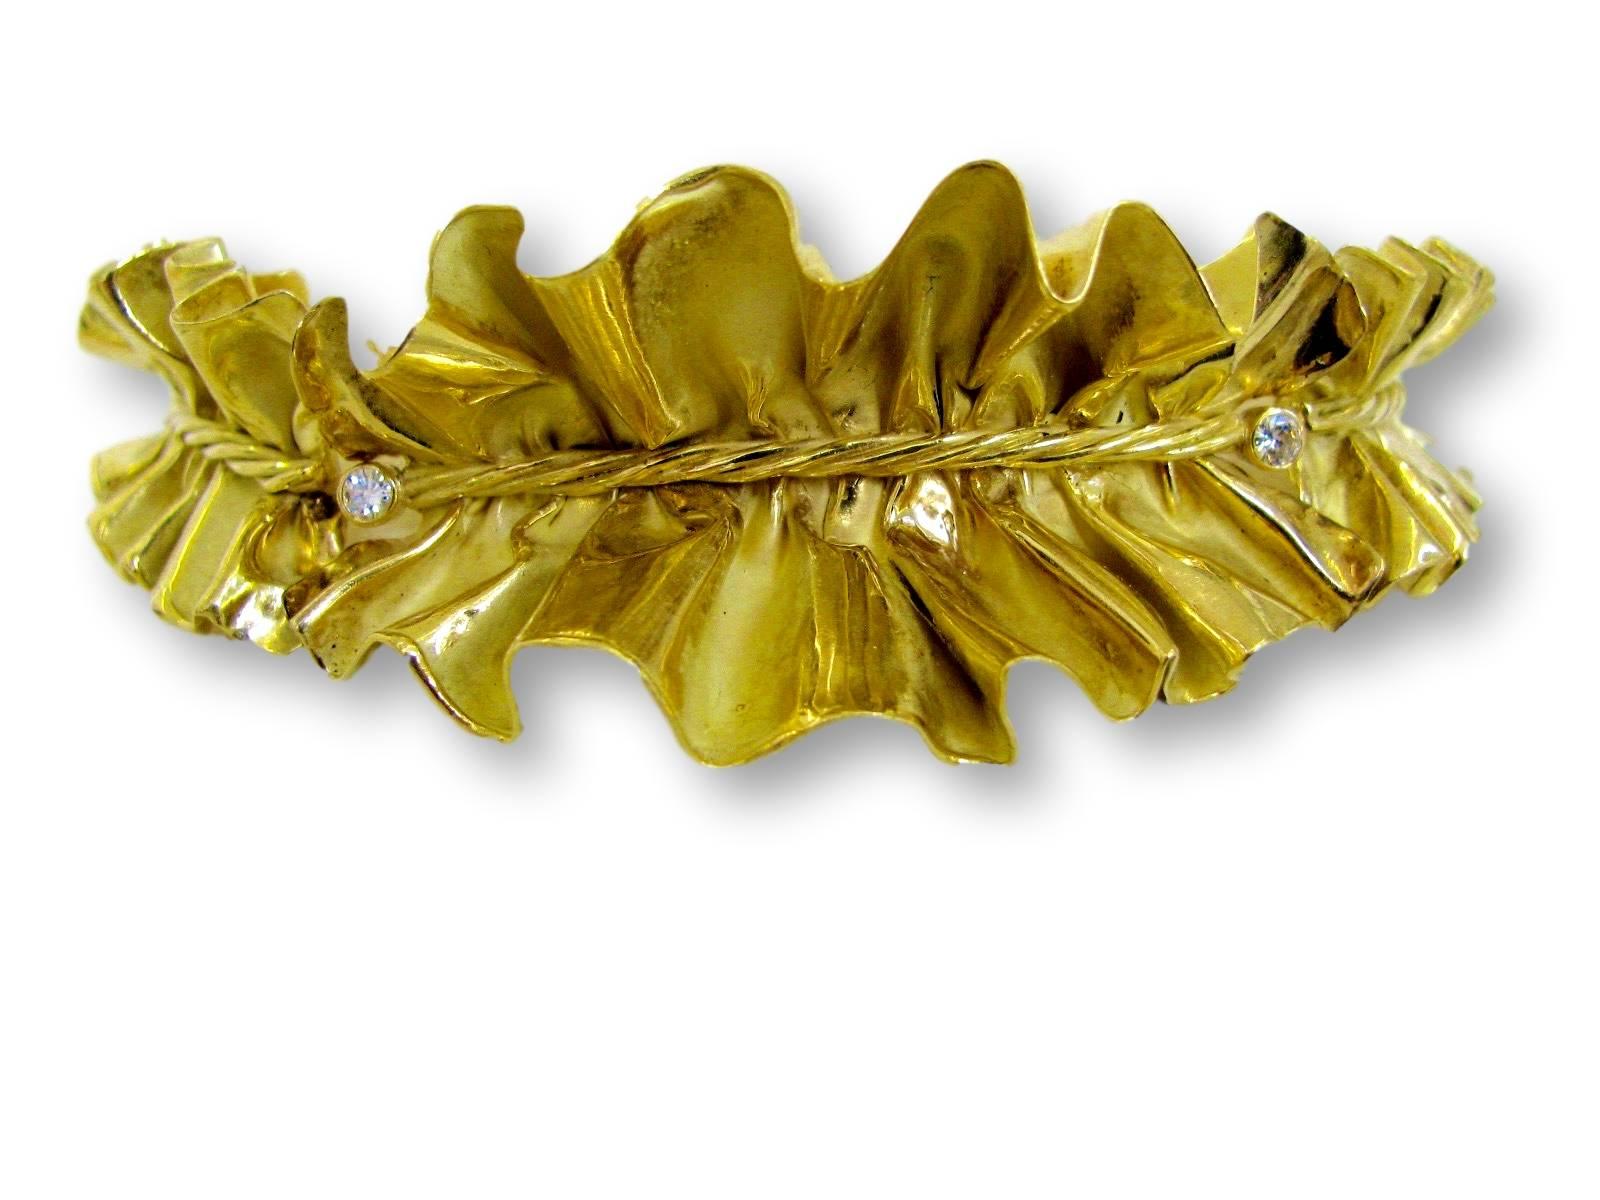 Anna Maria Cammilli hand made gold necklace. The Necklace, in the style of a Ruff Collar, fashioned in 18k yellow gold with both a mat and mirror finish. This fabulous piece of Artist- Jewelry is an early work by Cammilli who premiered her first